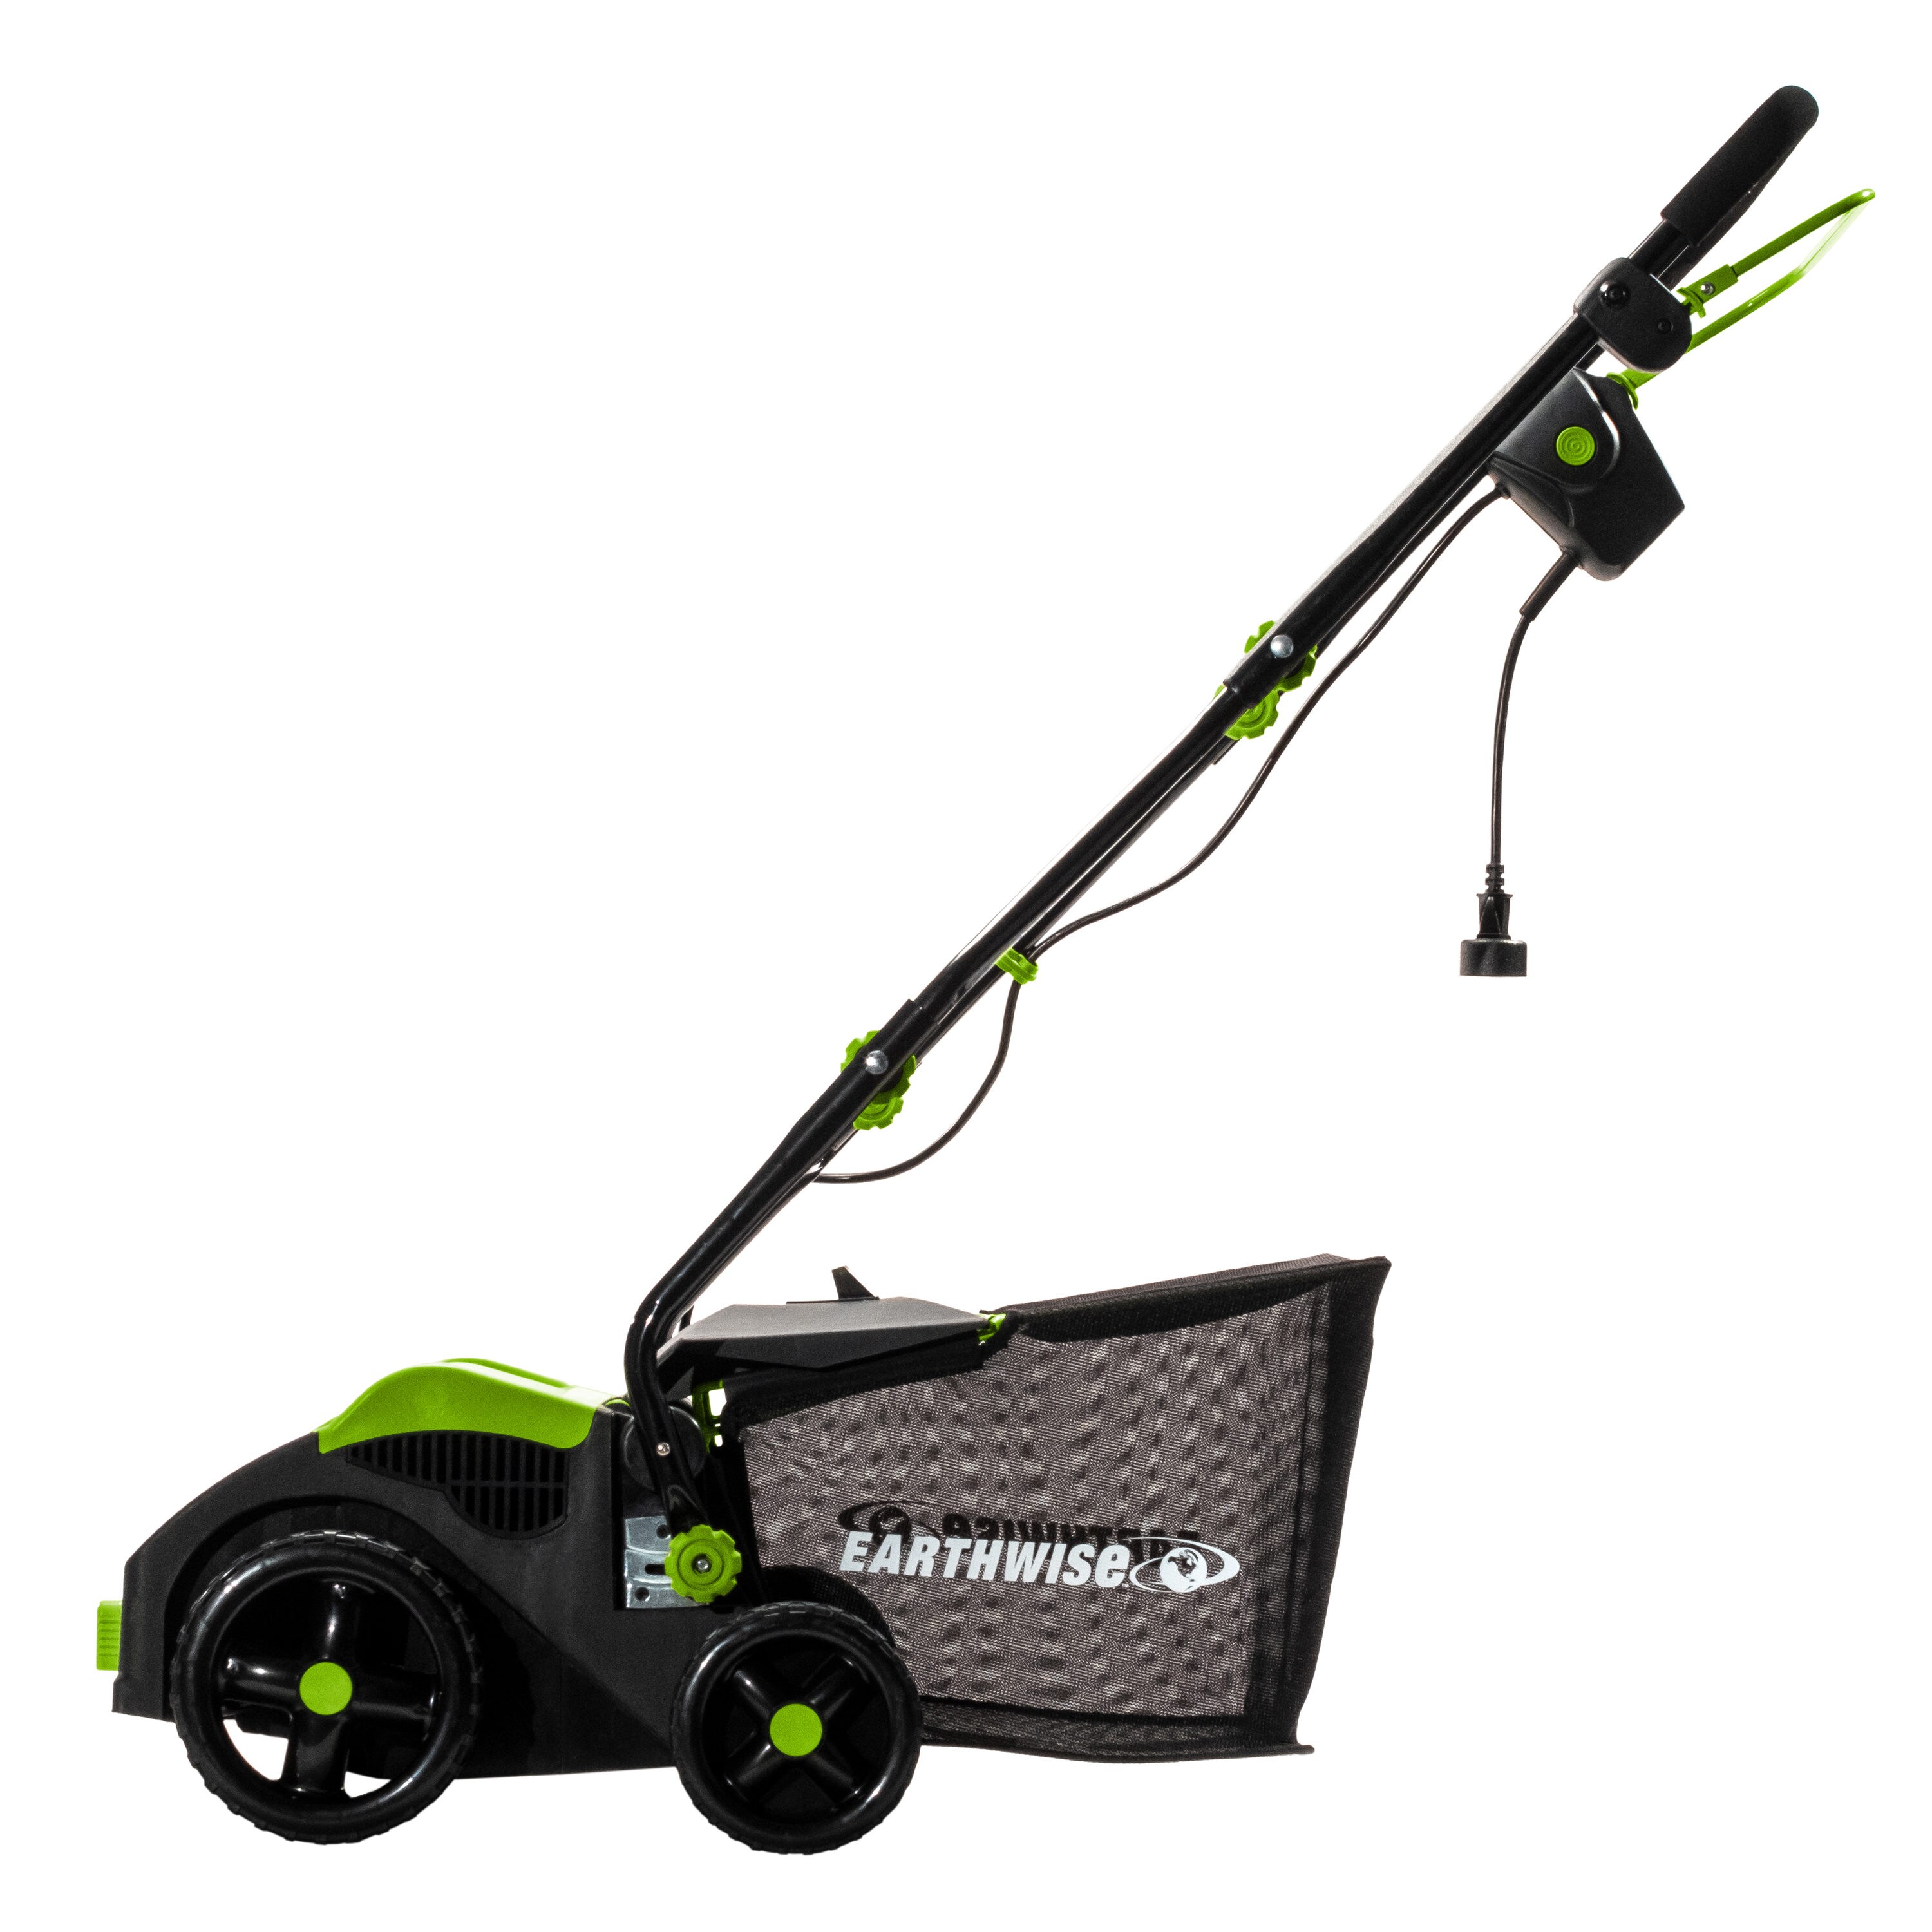 Earthwise Lawn Mower Attachments at